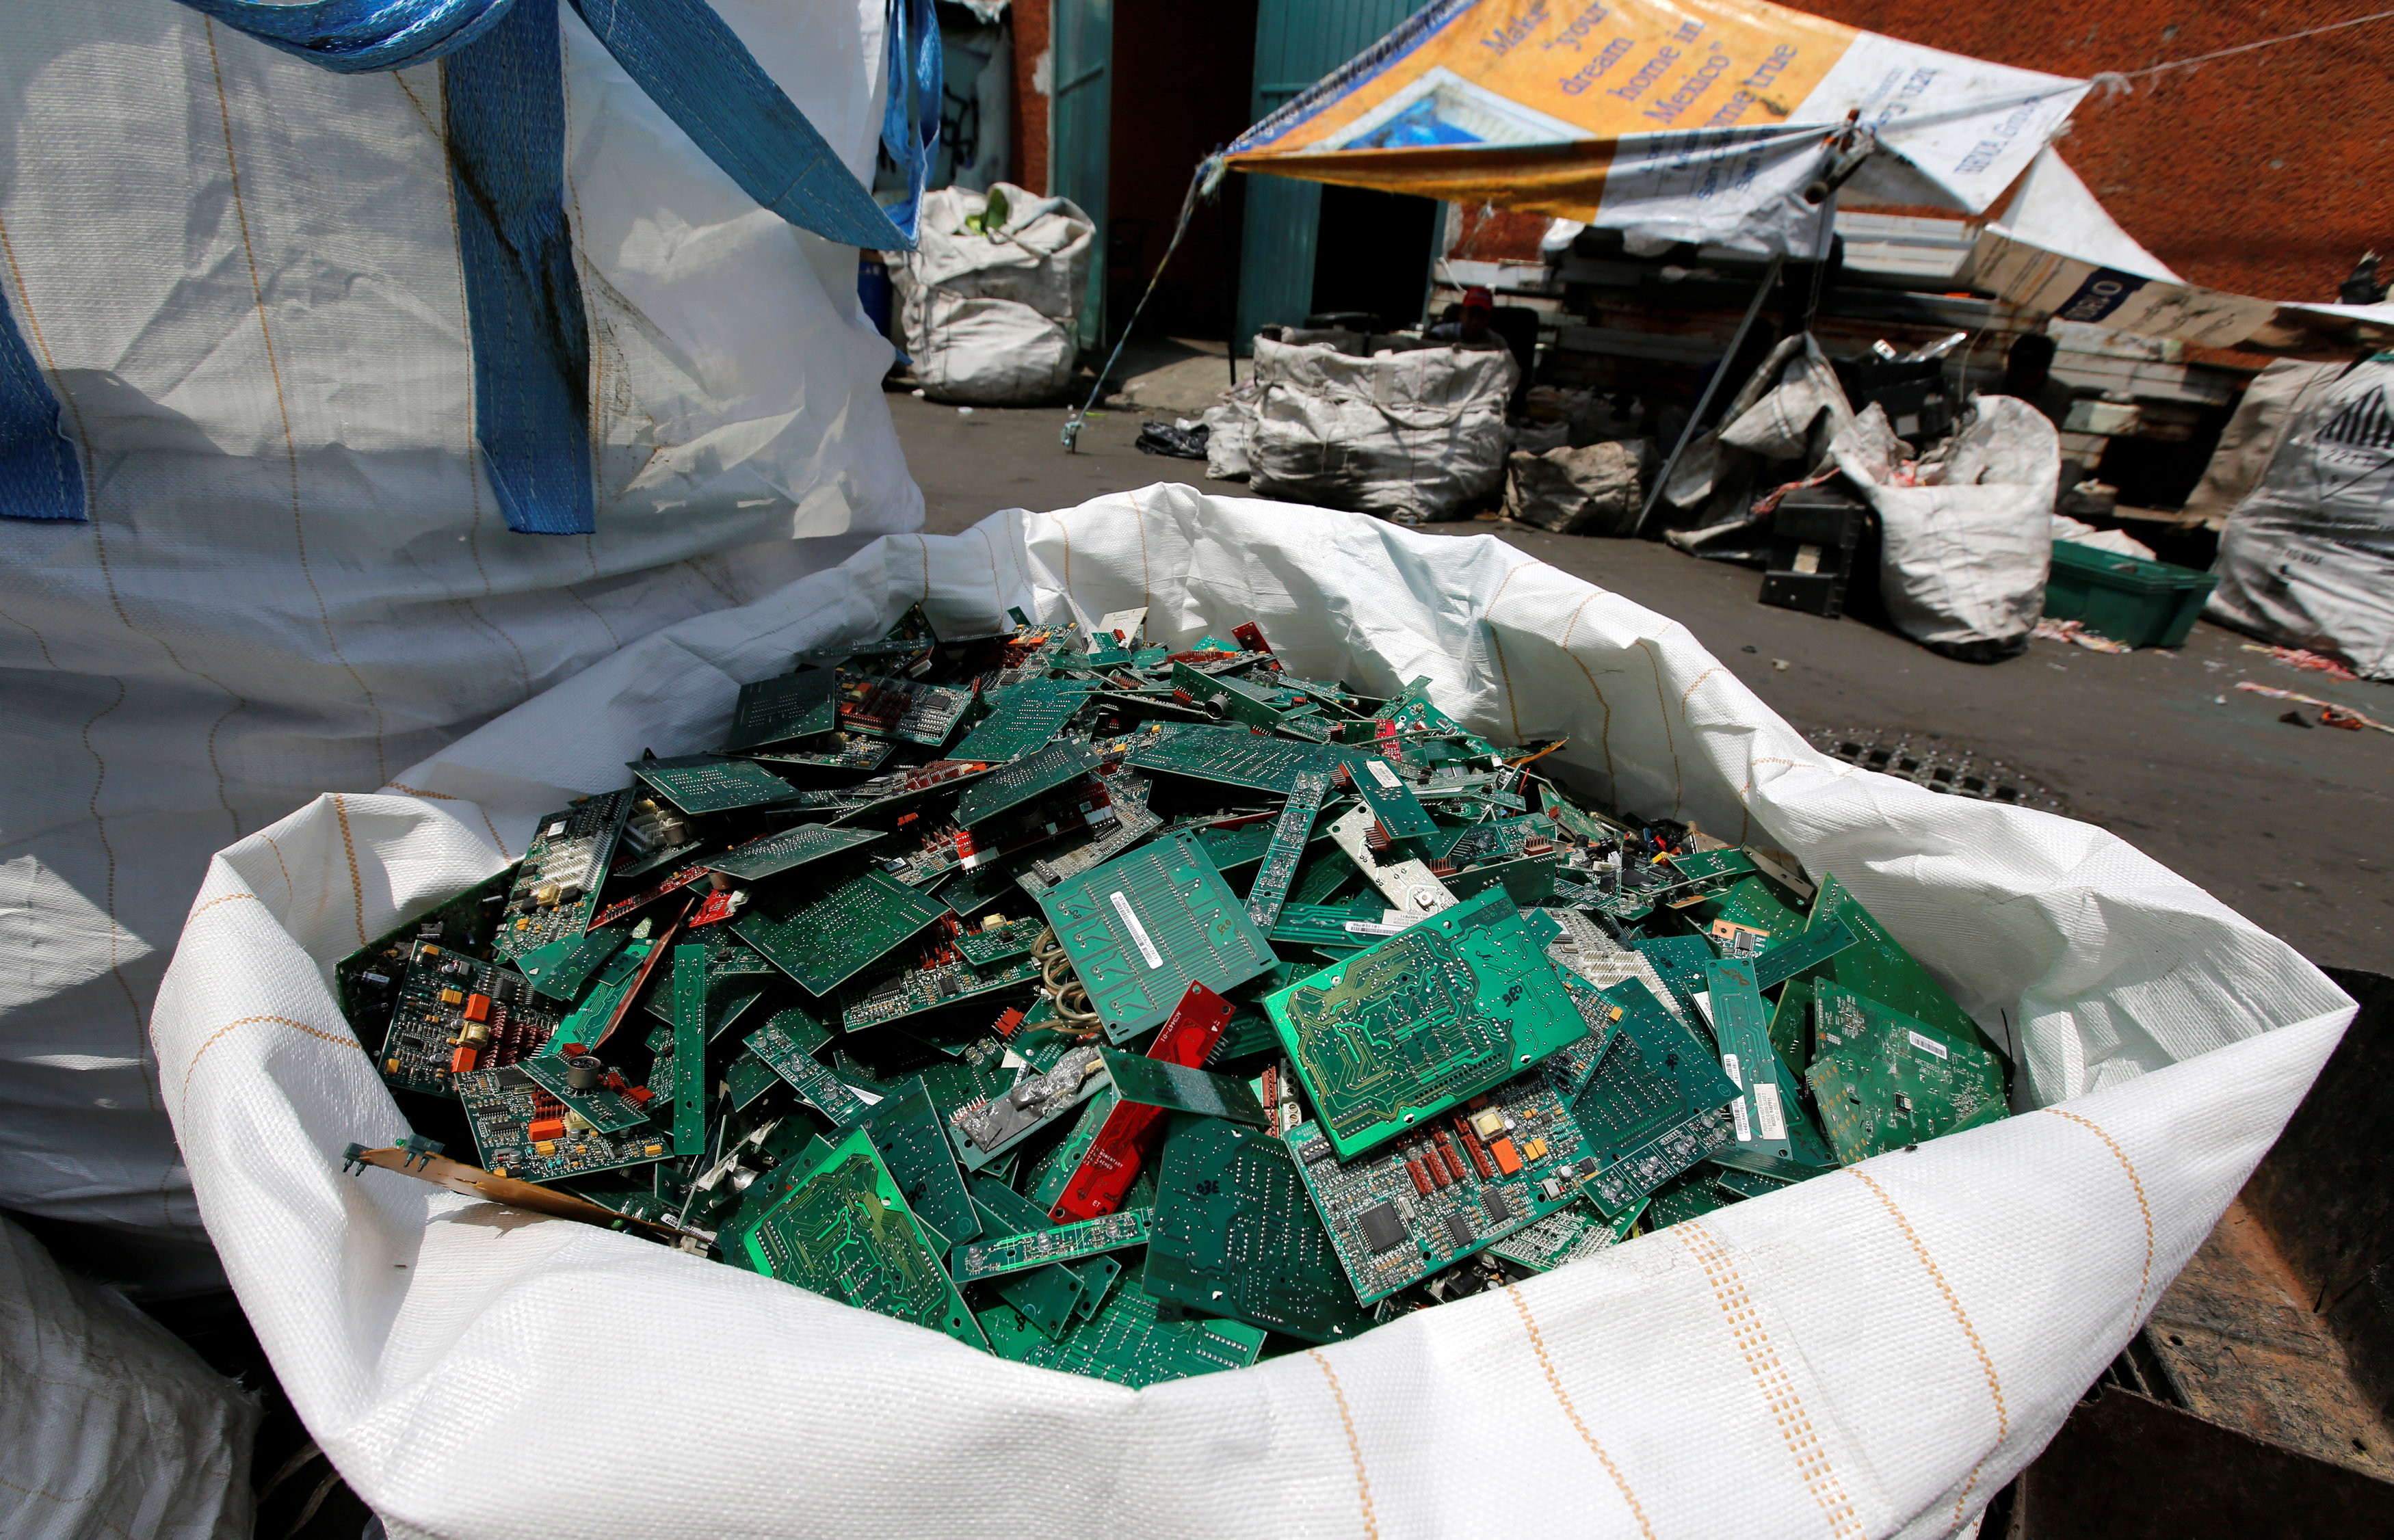 In pictures: Electronic waste at Peru water treatment plant